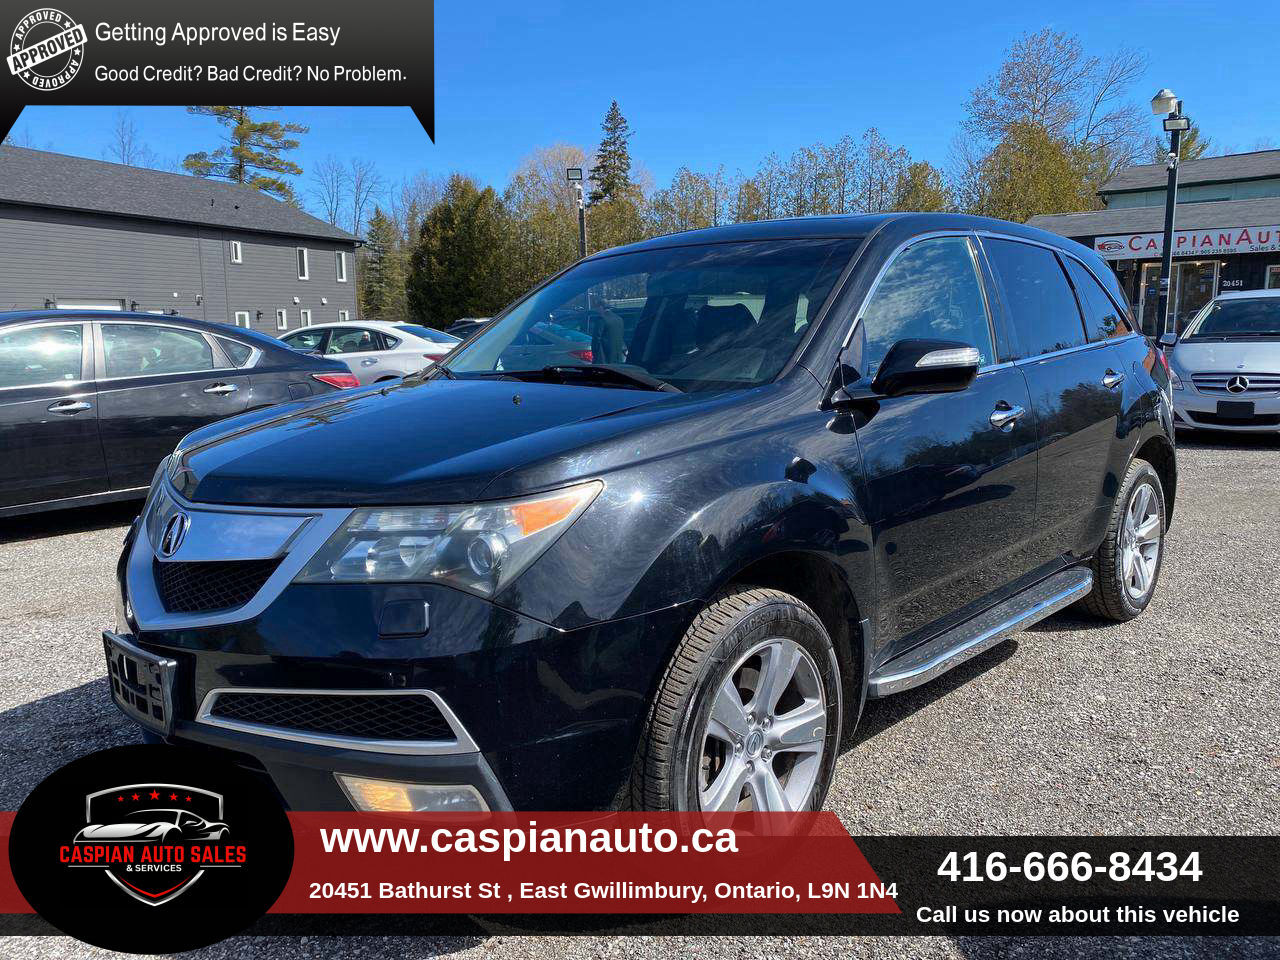 2011 Acura MDX 7 passengers /SH-AWD /NO ACCIDENTS